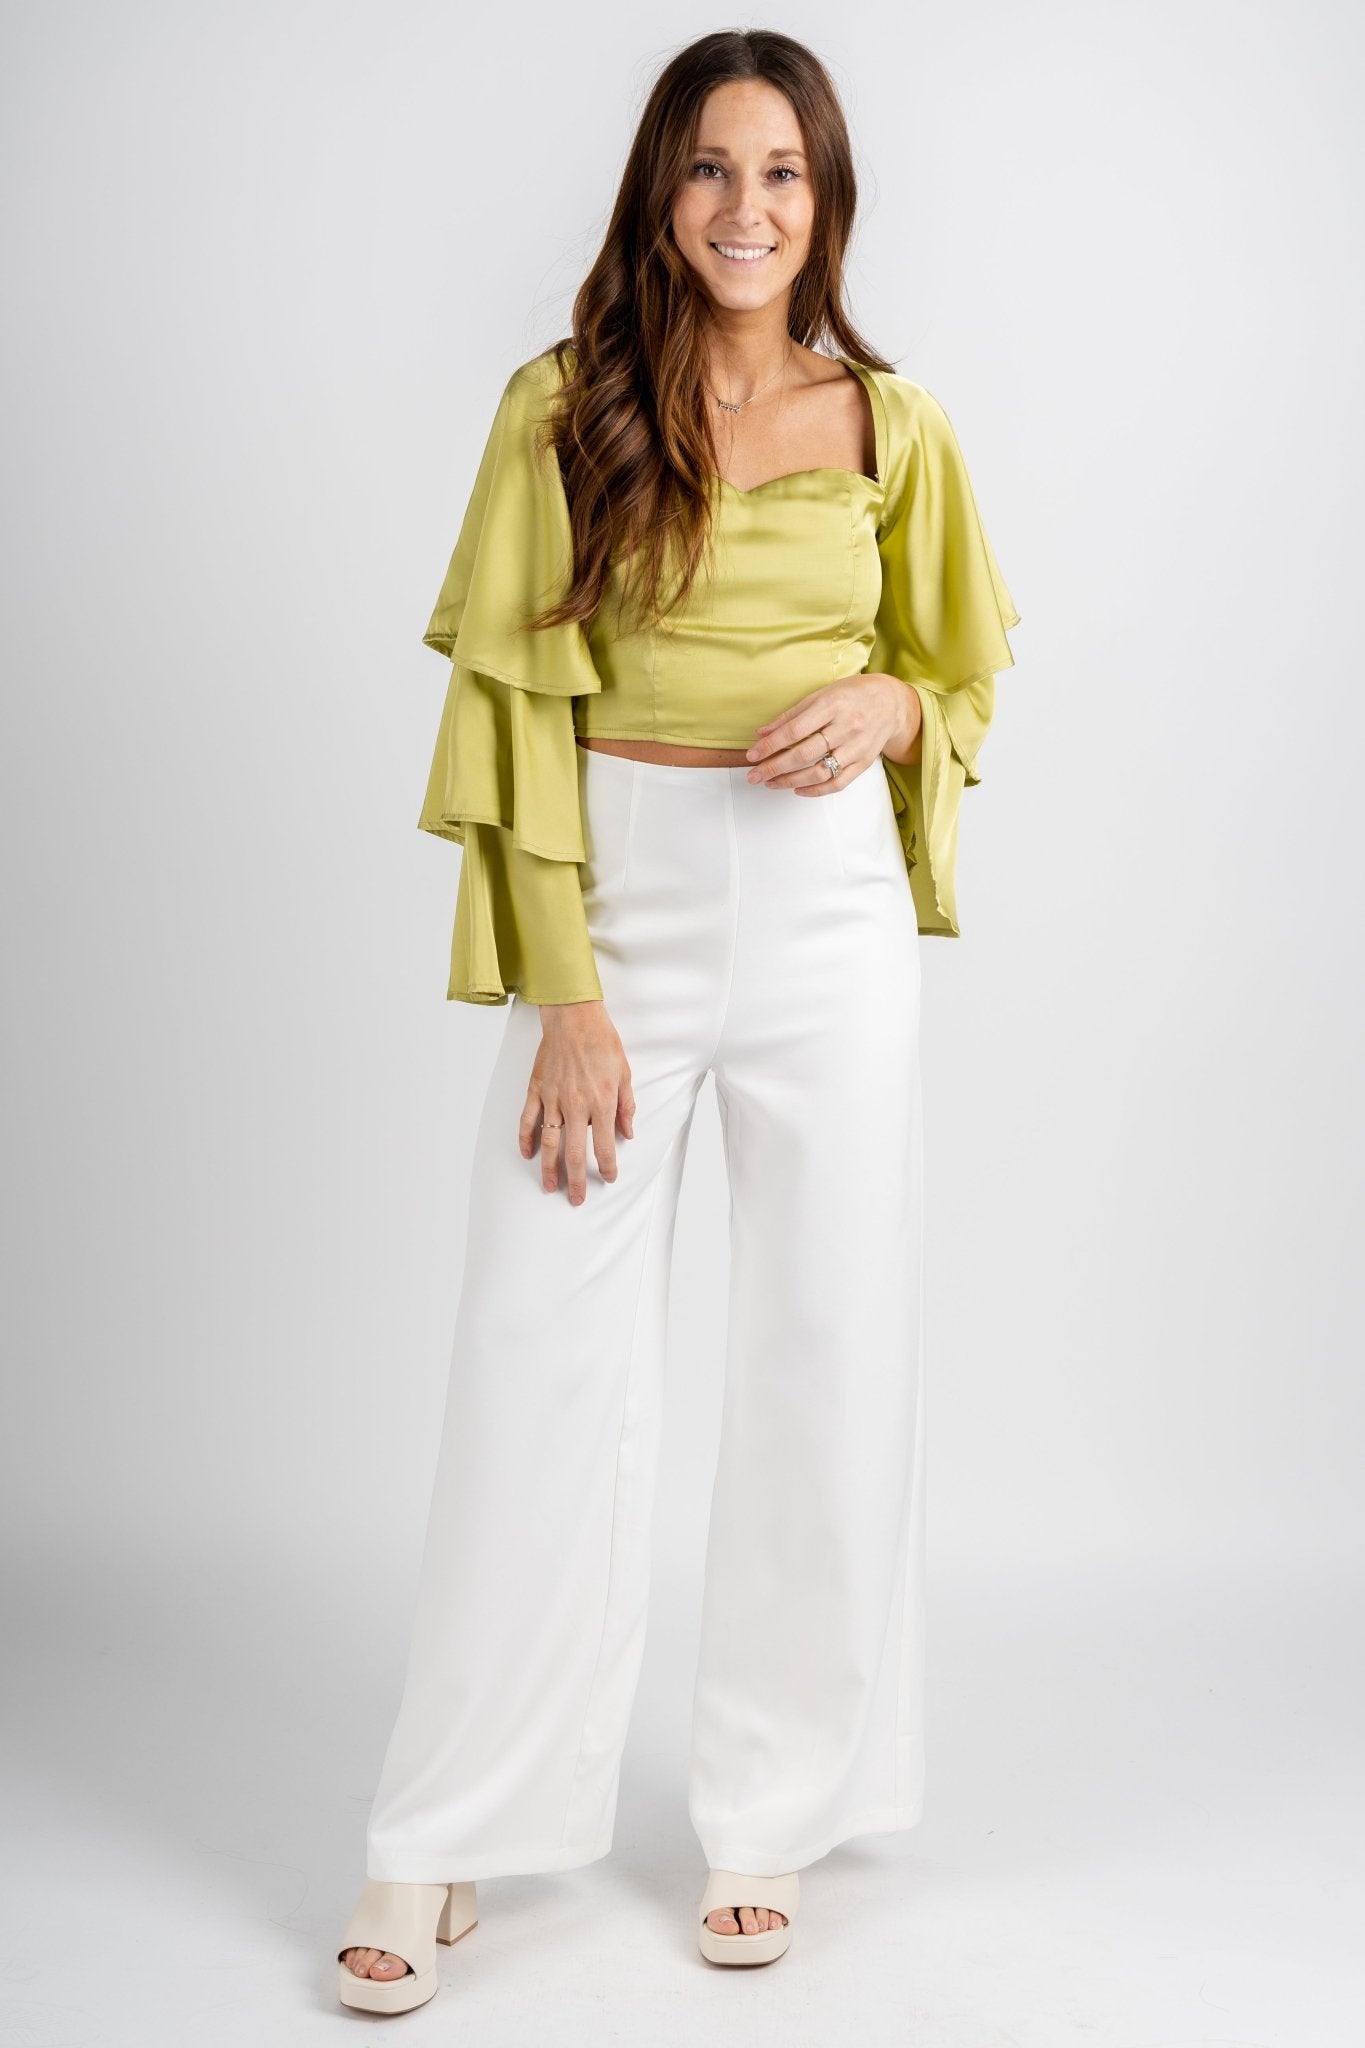 Trumpet sleeve crop top muted lime - Stylish Top - Trendy Staycation Outfits at Lush Fashion Lounge Boutique in Oklahoma City